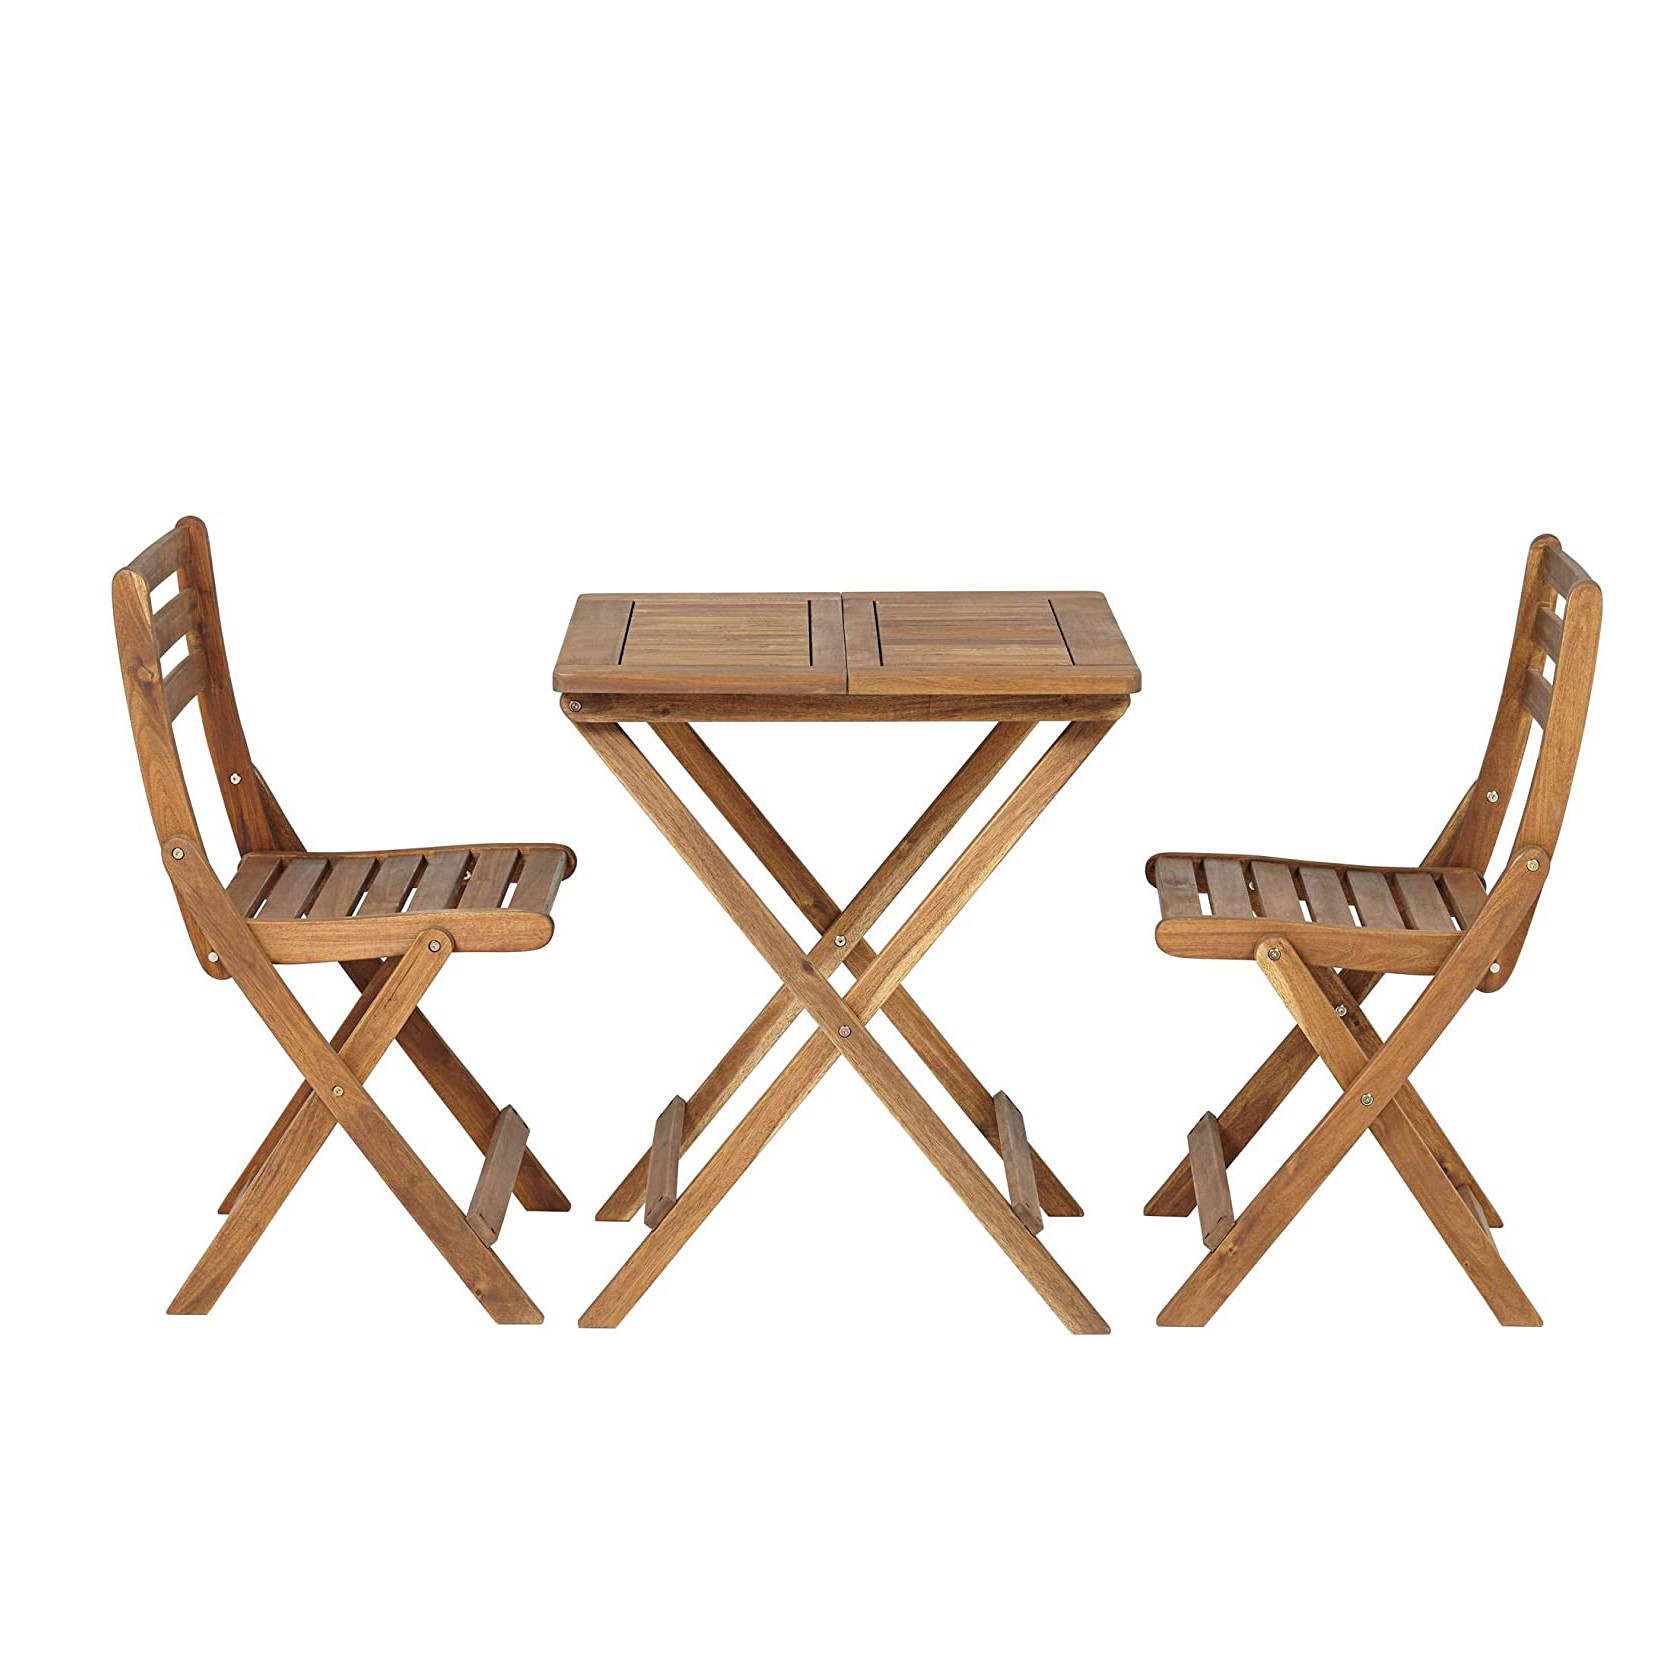  ISO 9001 Garden Outdoor Wood Bistro Table And Chairs Set Manufactures